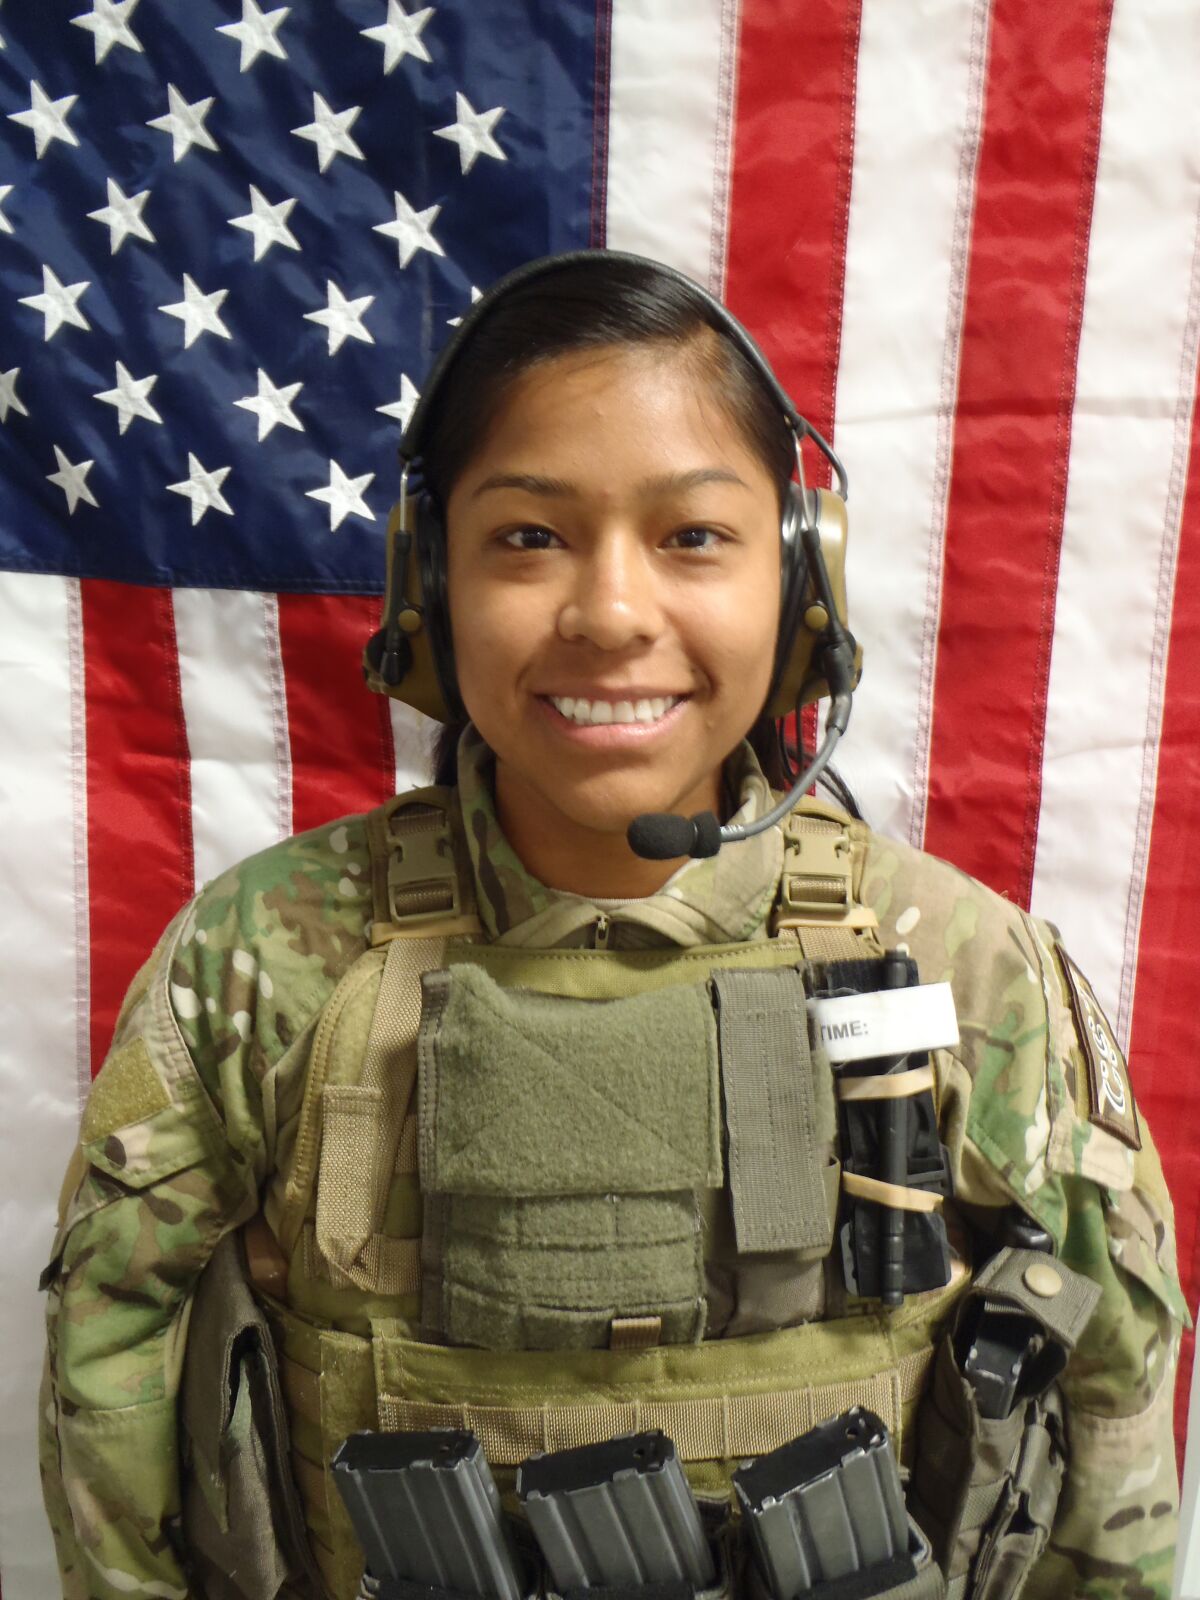 Jennifer Moreno was awarded the Bronze Star for valor and promoted to captain posthumously. 